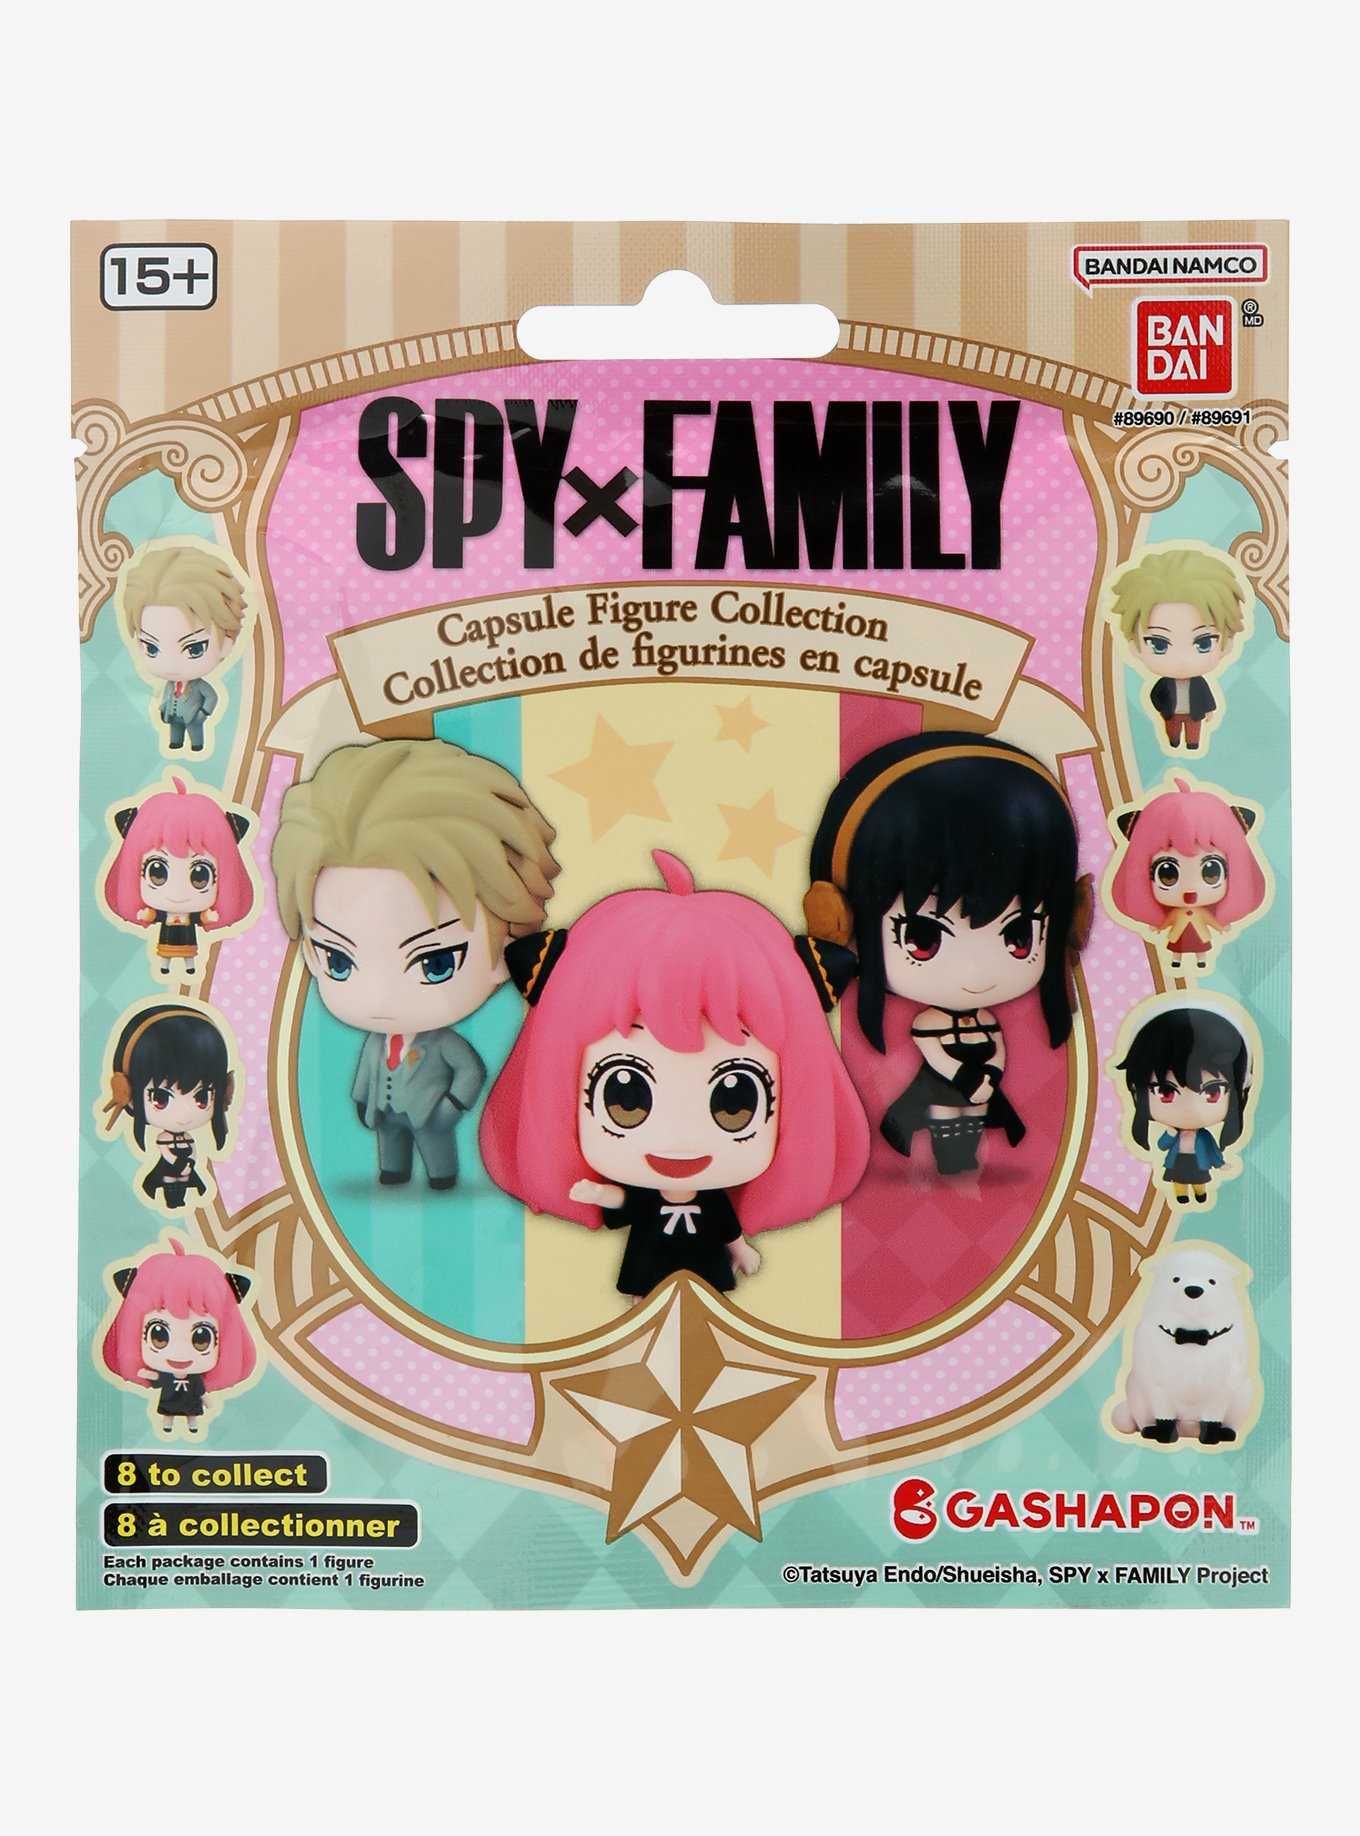 Spy x Family Blind Bag Party Favors 3 Pack – Spy x Family Party Supplies  Bundle with 3 Spy x Family Sleepy Figurines and More | Anime Figurines Spy  x